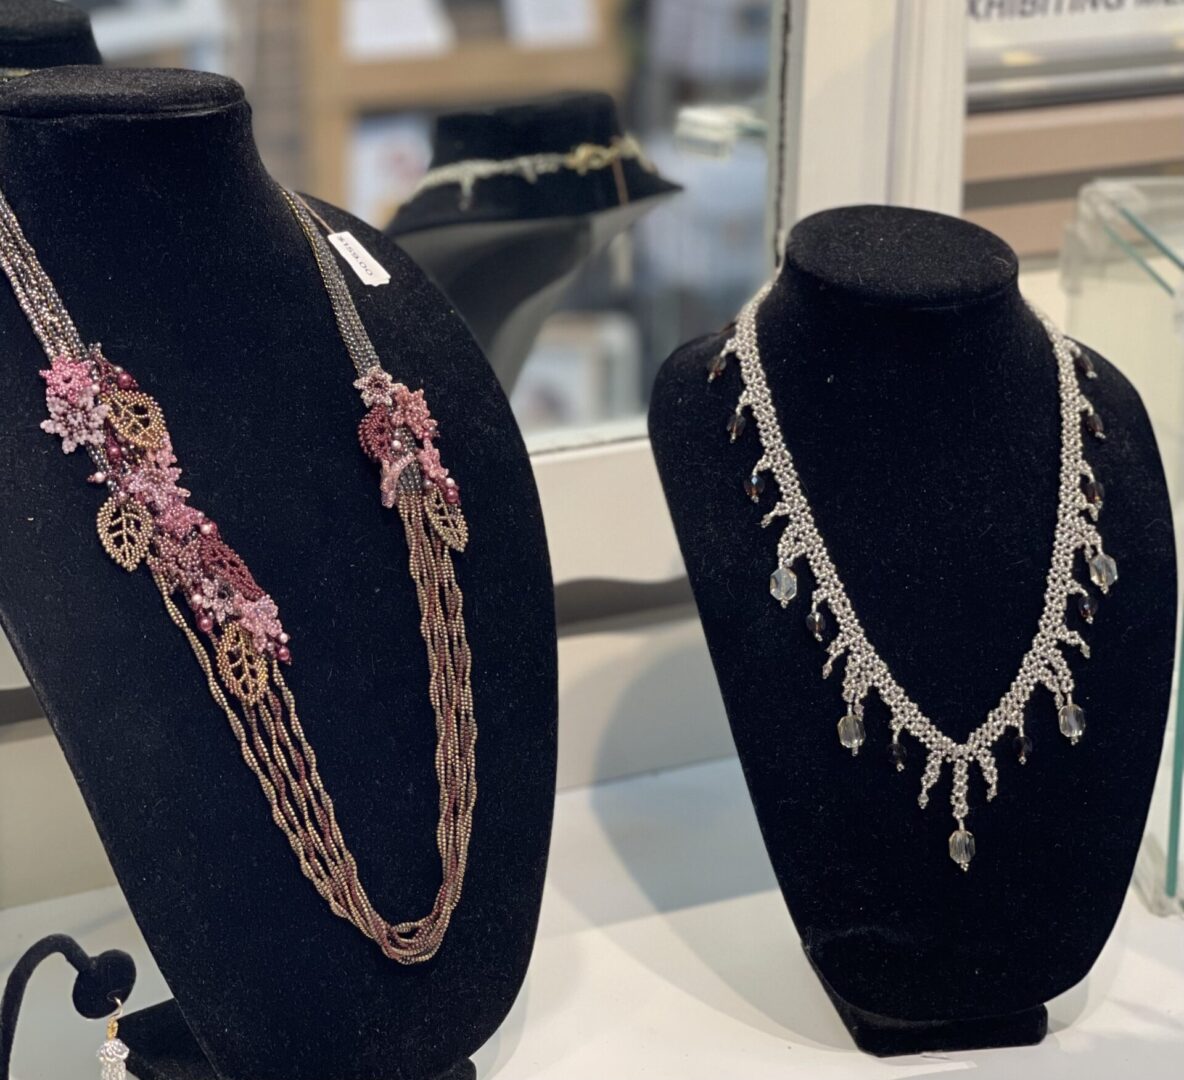 Three necklaces on display in a jewelry store.